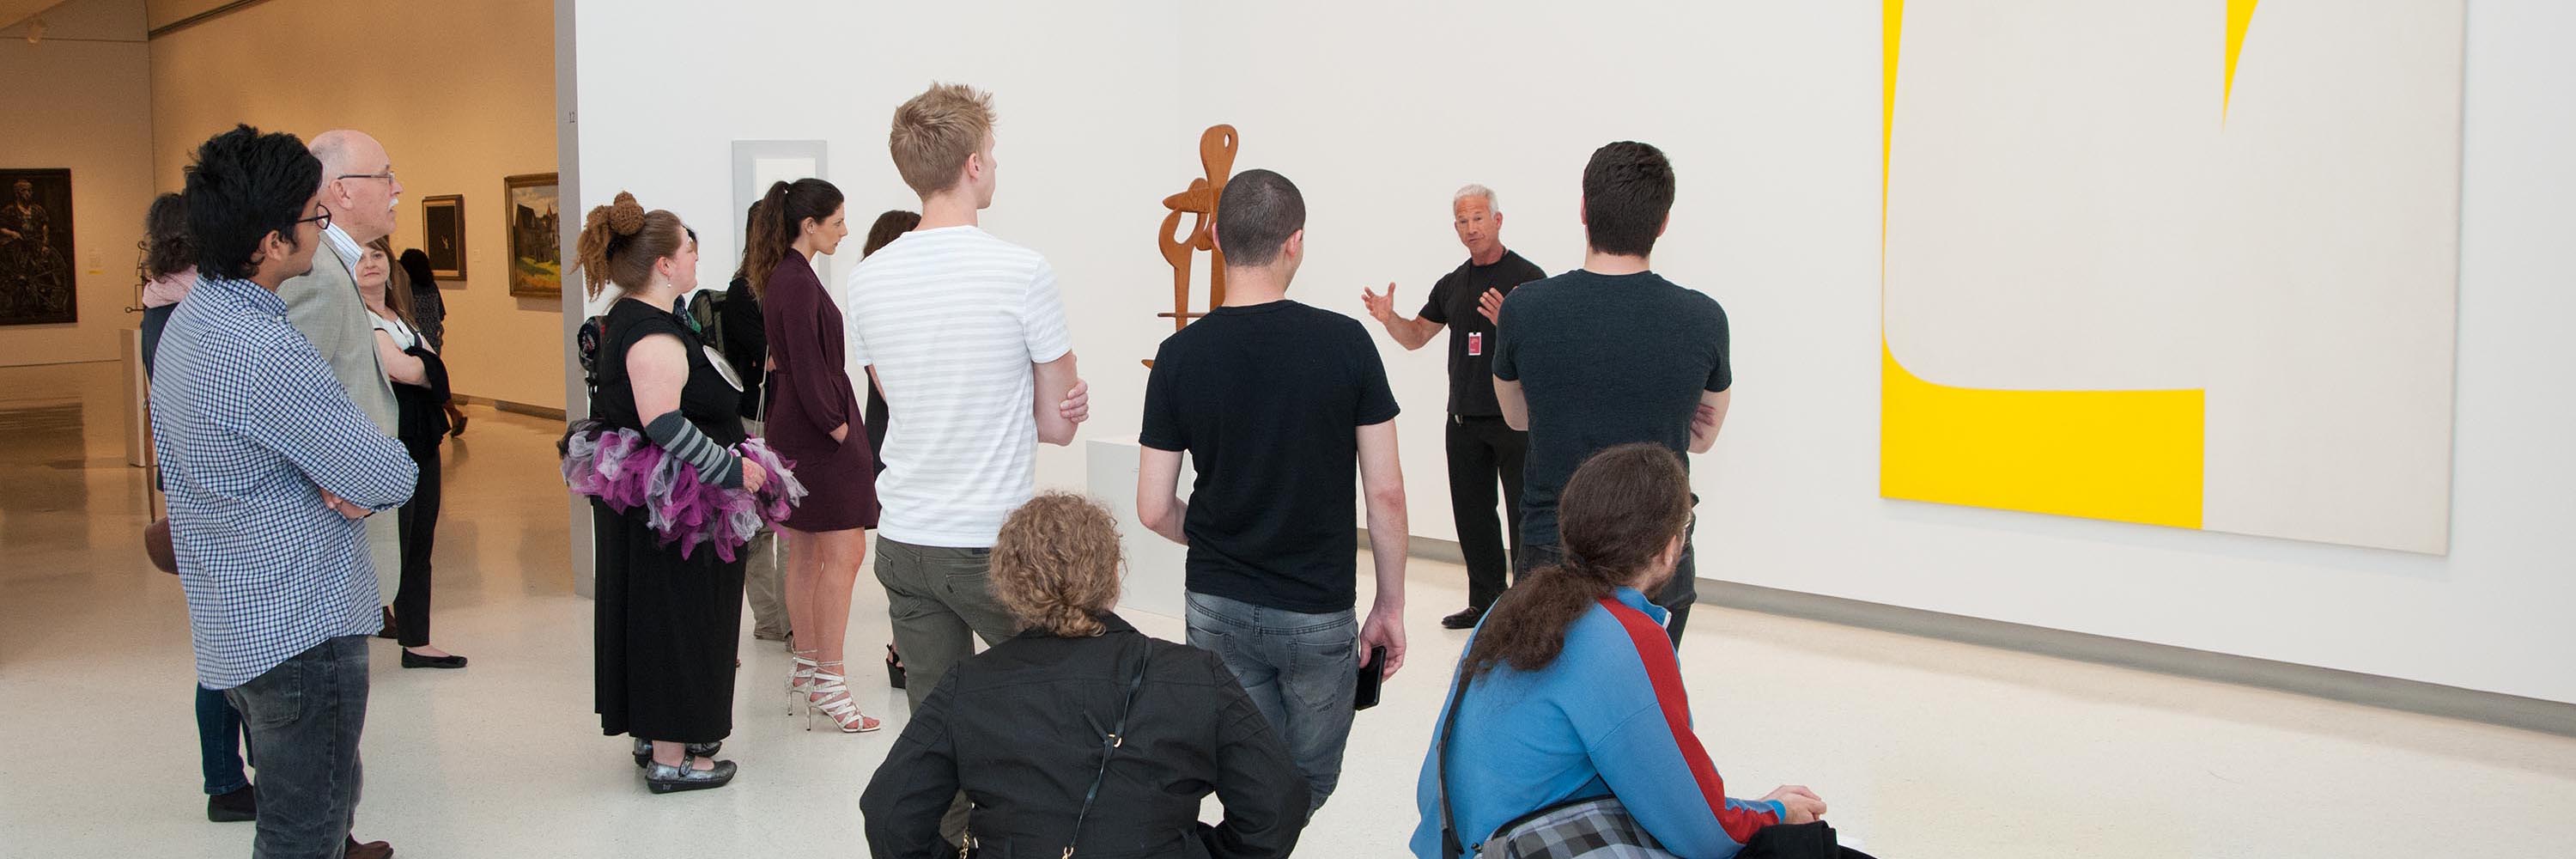 Tour guide discusses art with a group of people